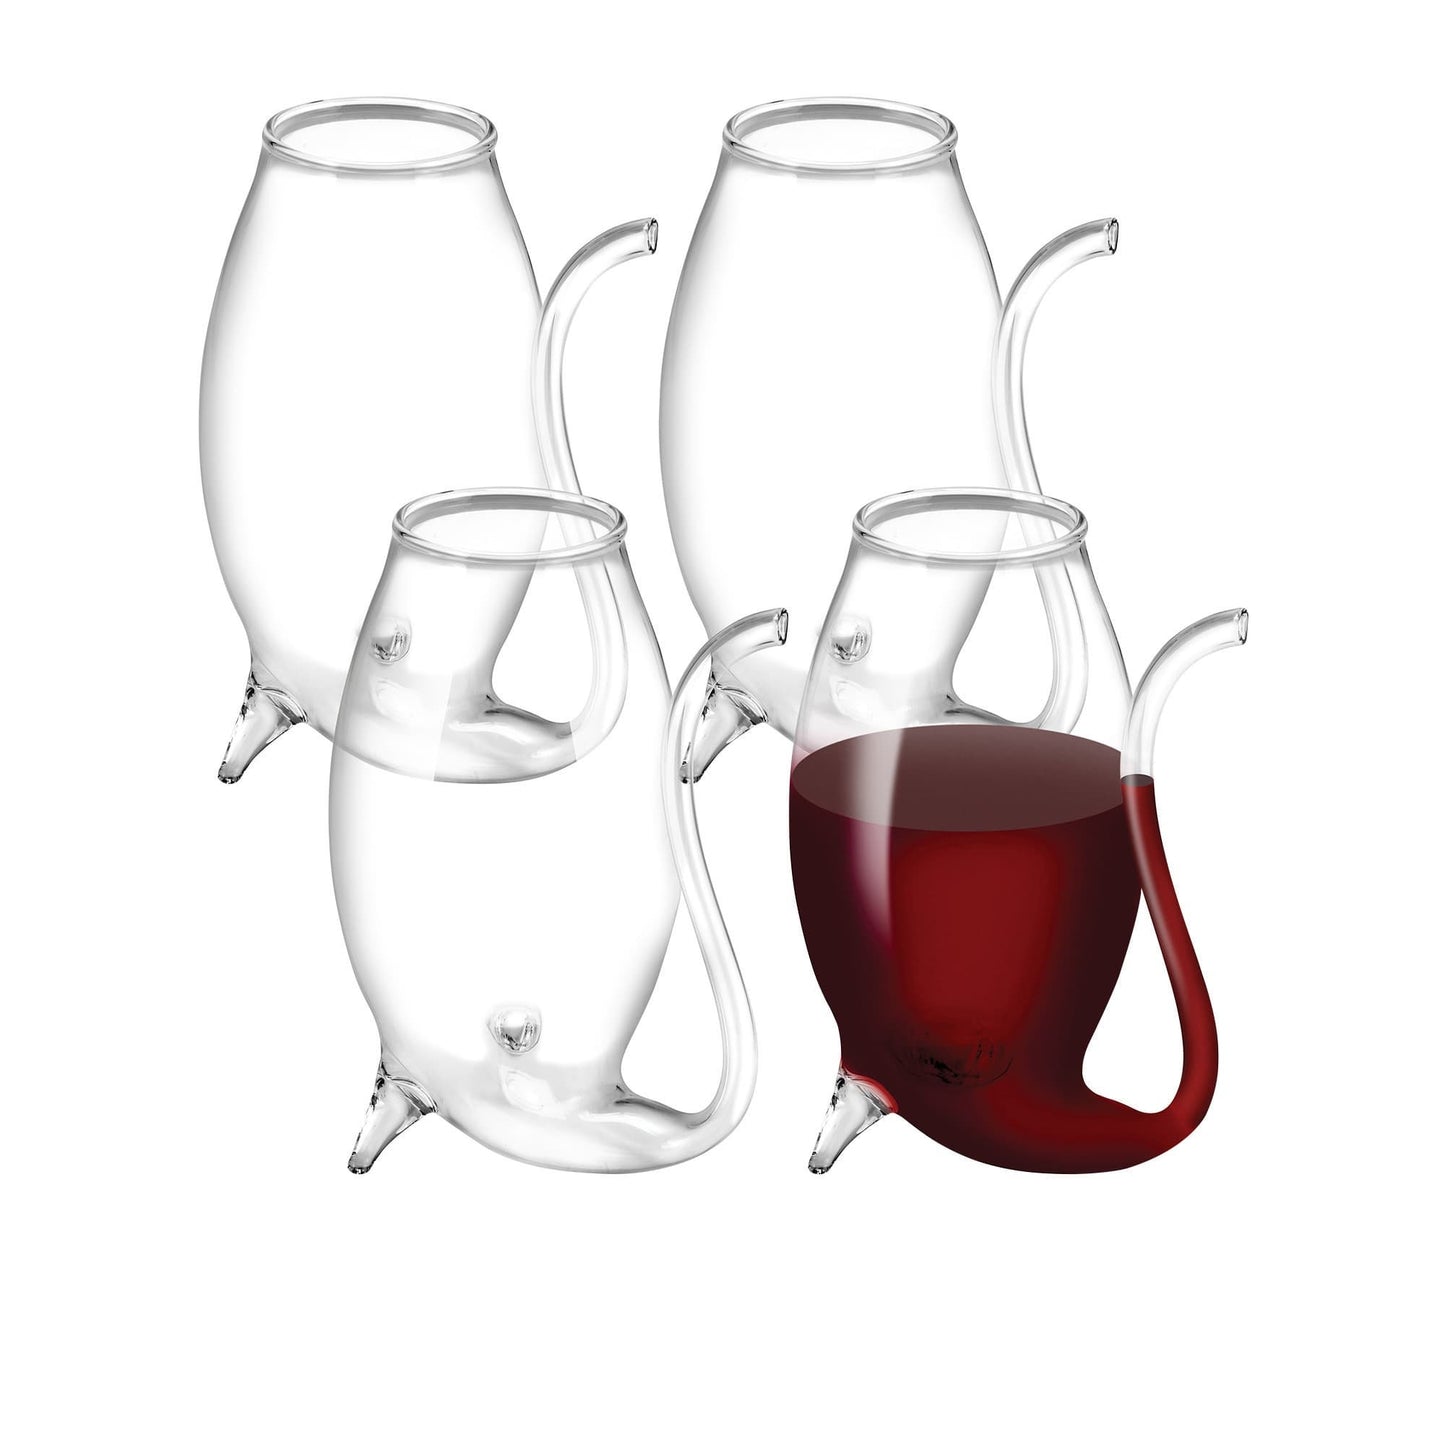 Port Sippers wine glasses - set of 4 Glass